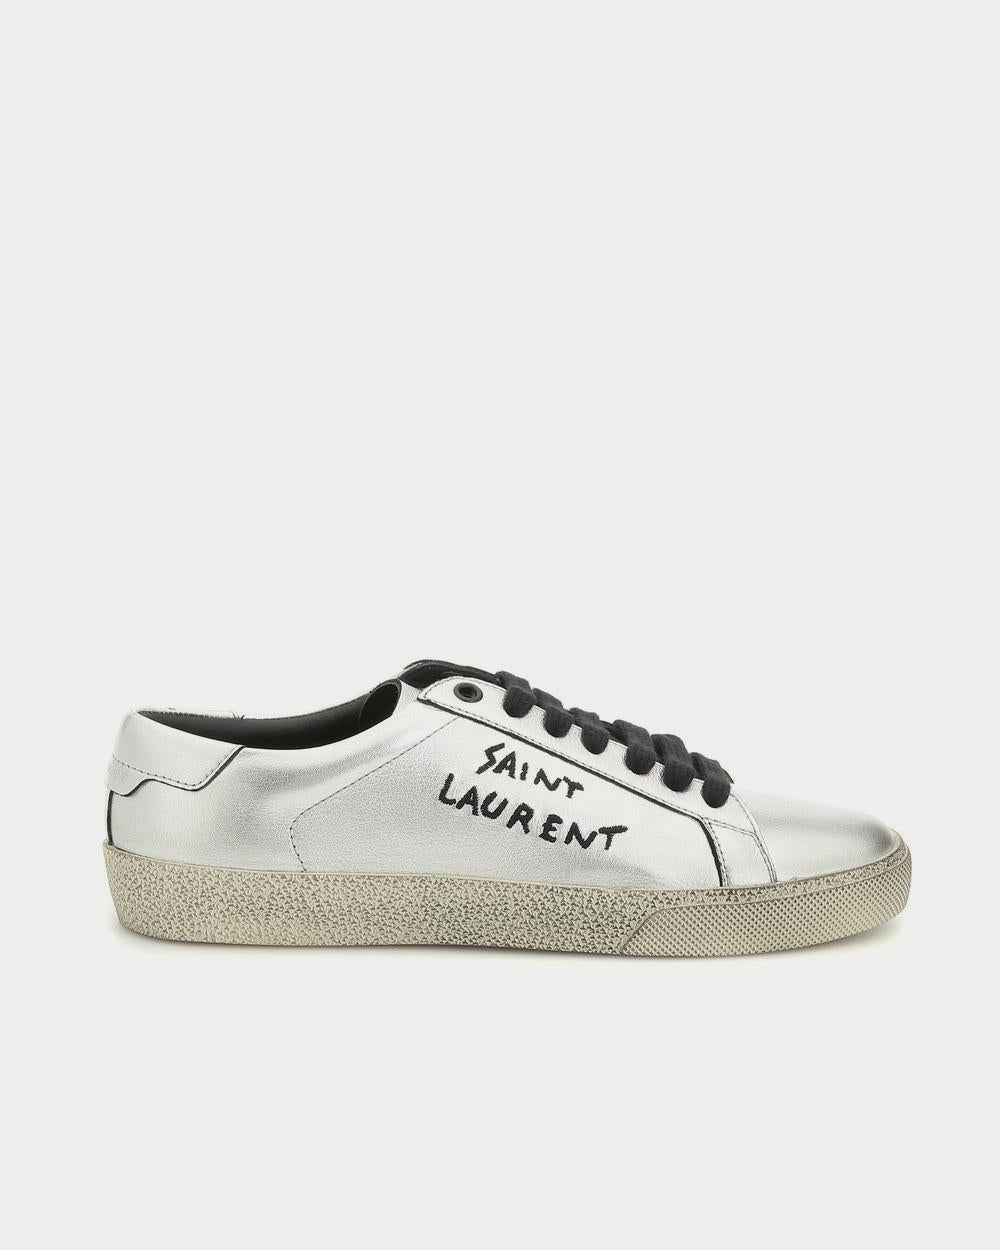 Saint Laurent Court Classic SL/06 leather Silver Low Top Sneakers - Sneak  in Peace